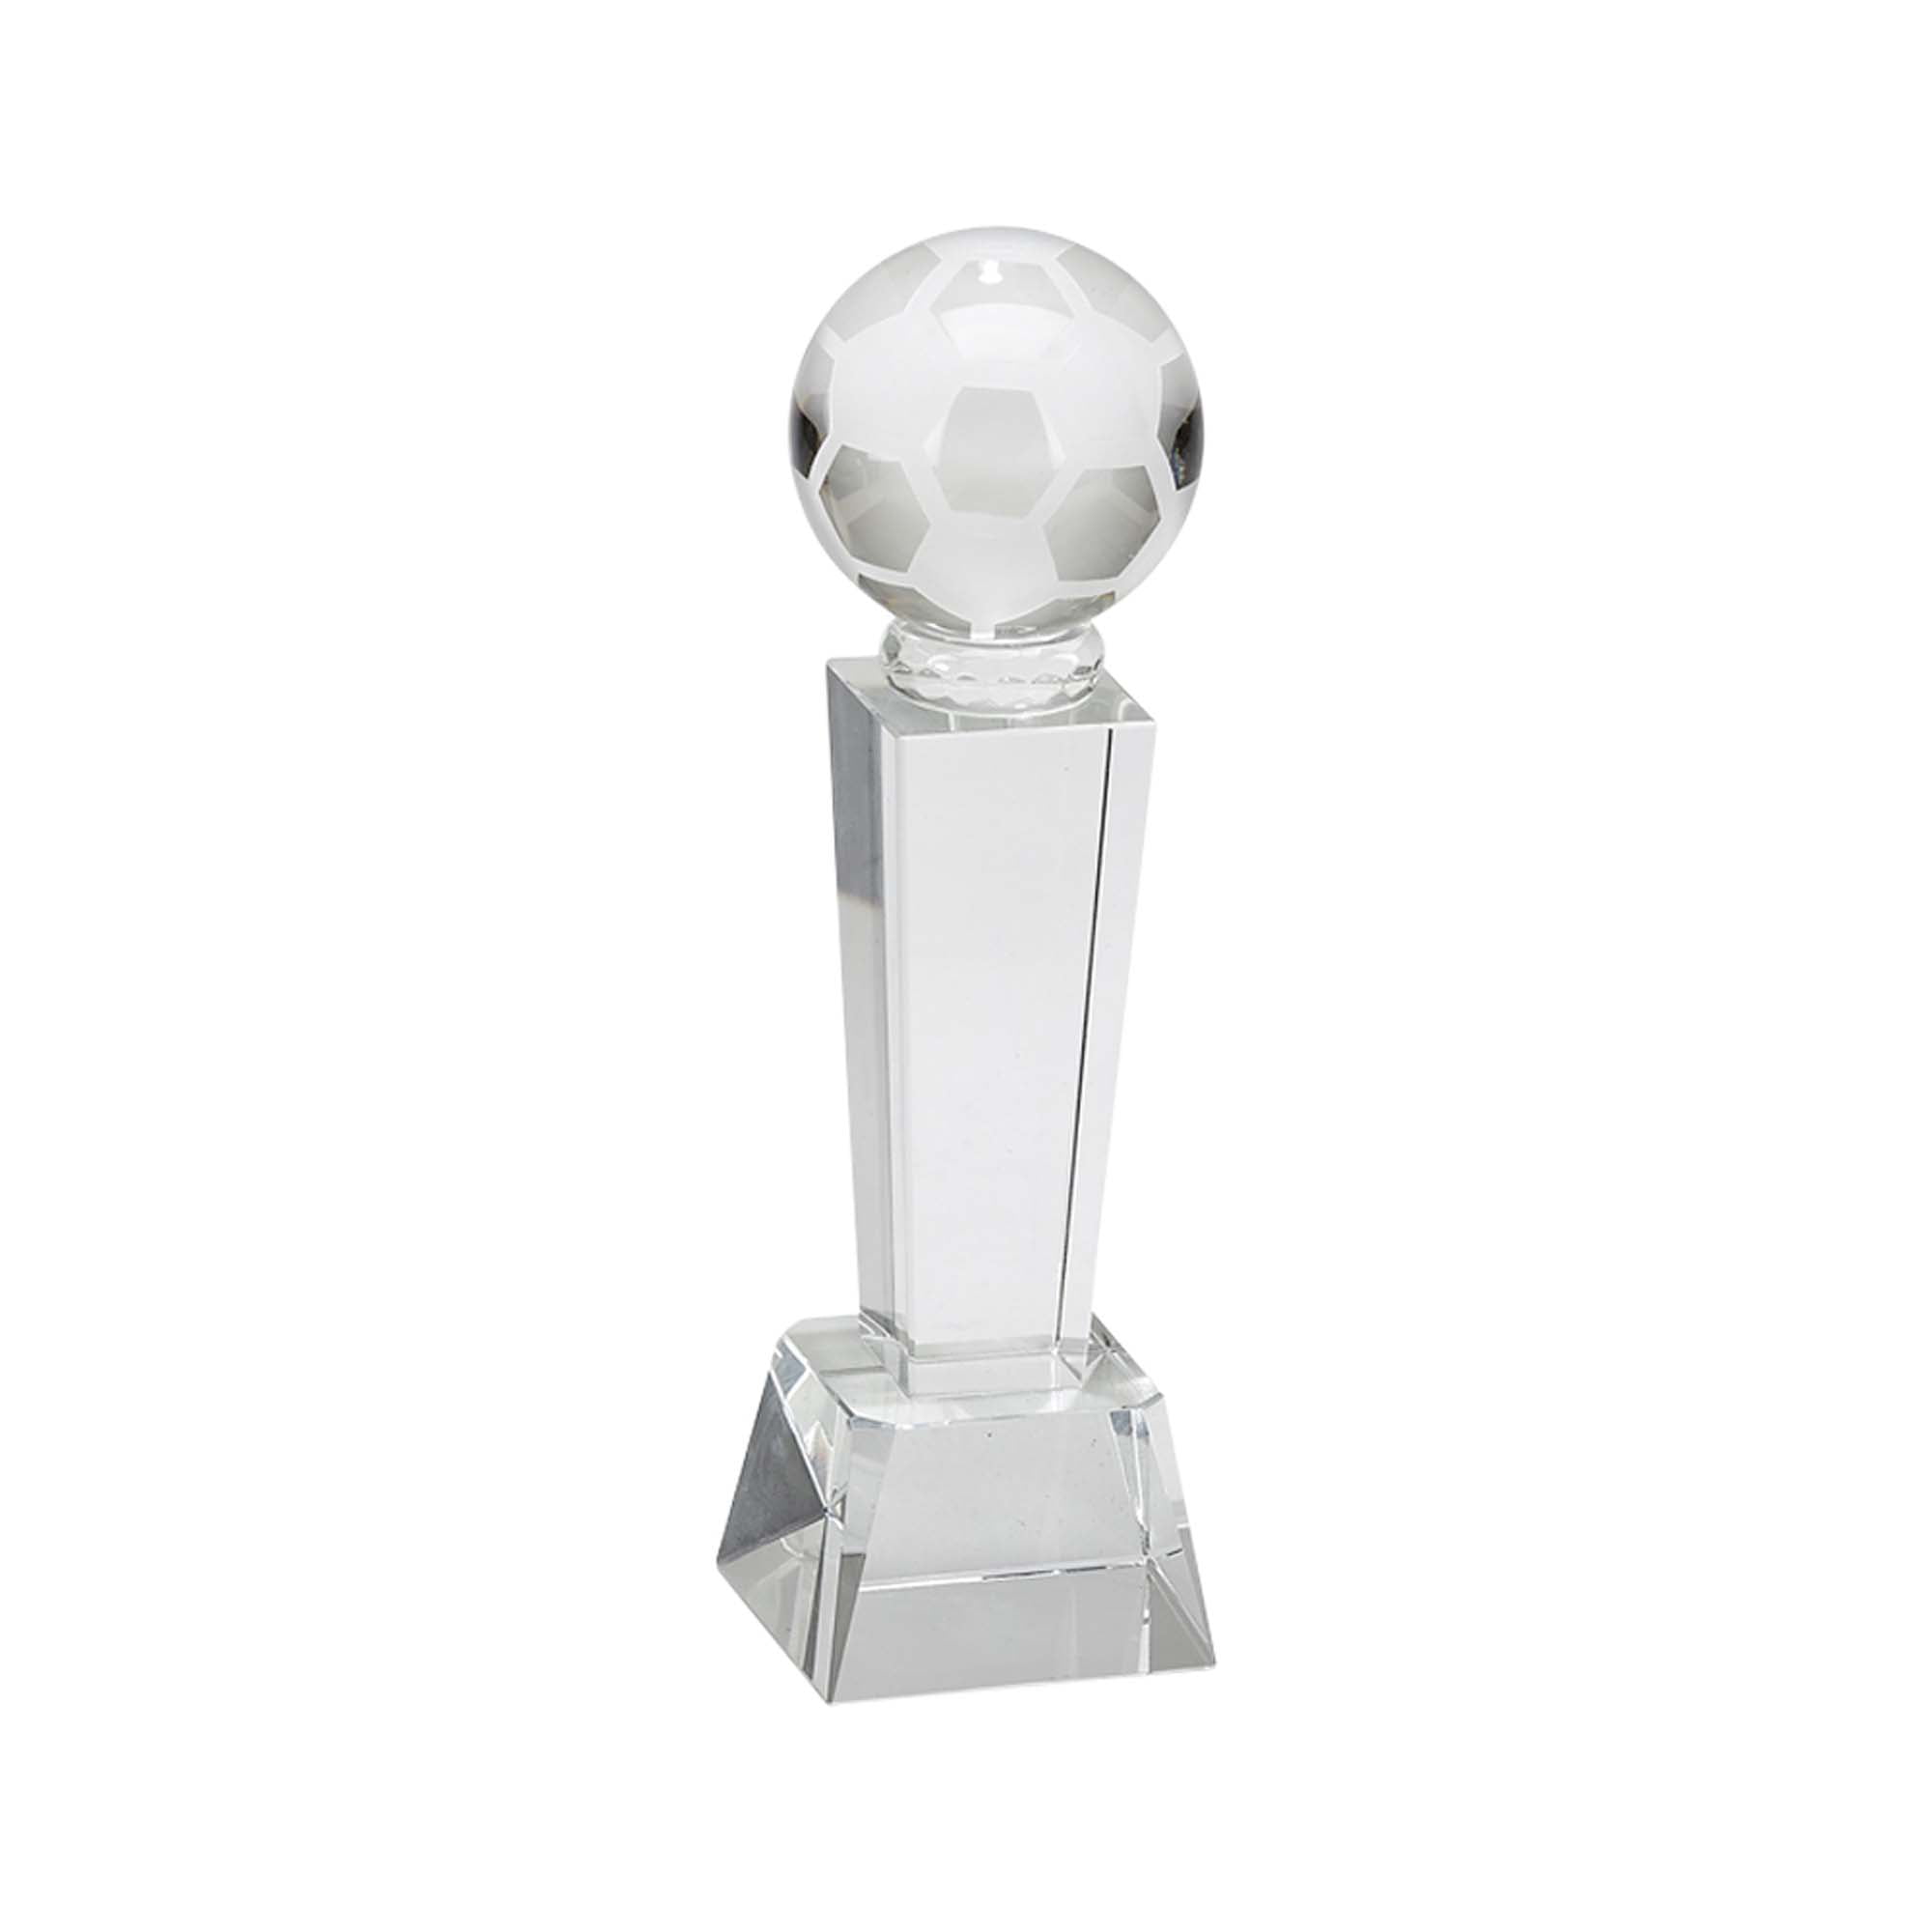 Picture of Creative Gifts International 004792 9.5 in. Optic Obelisk Soccer Trophy